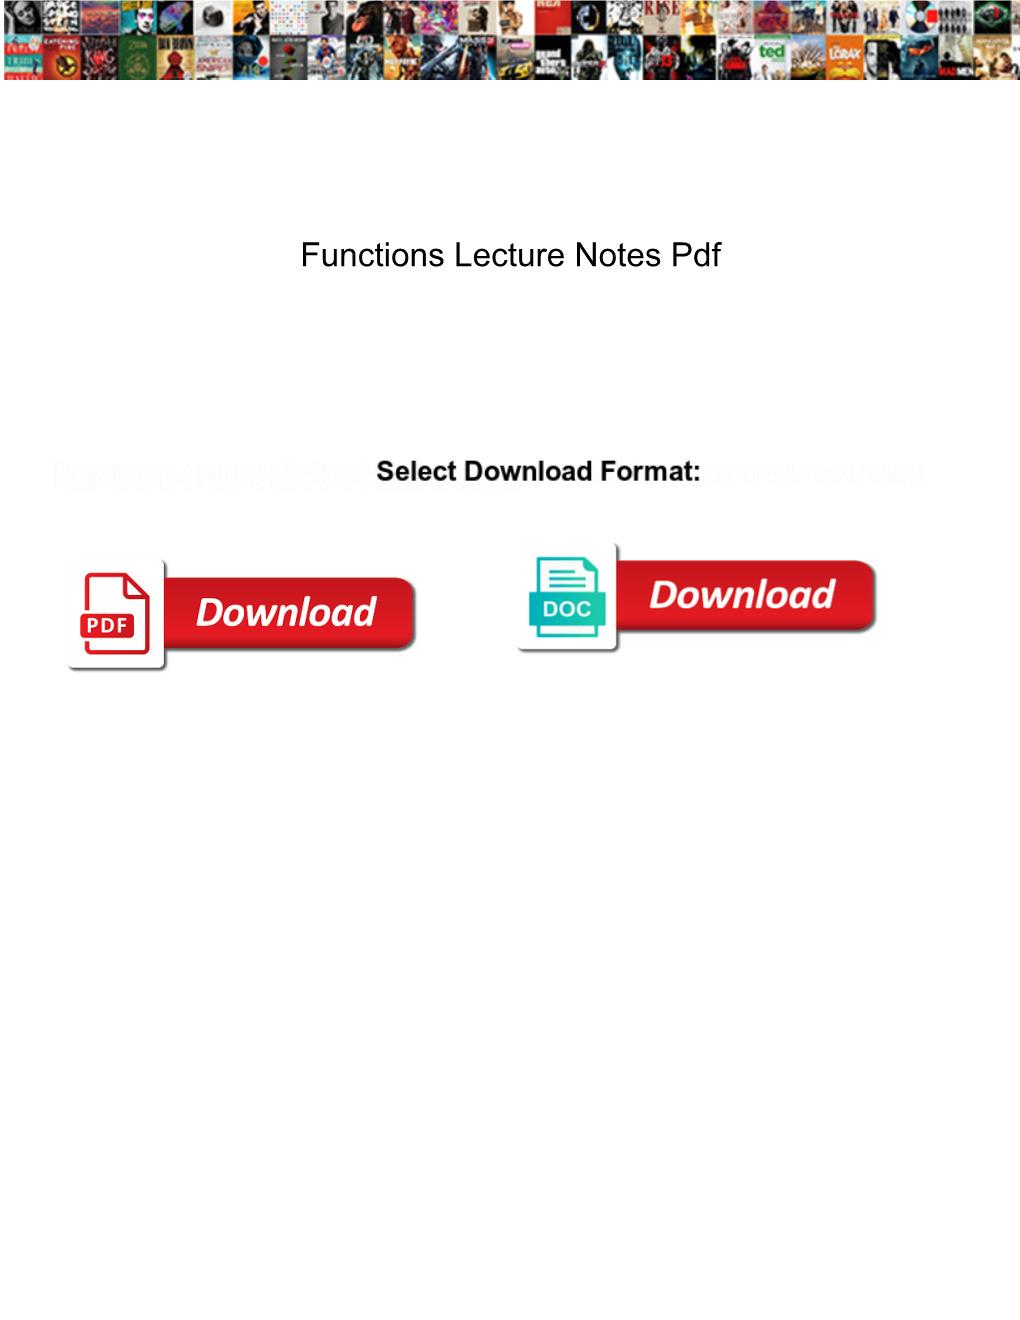 Functions Lecture Notes Pdf